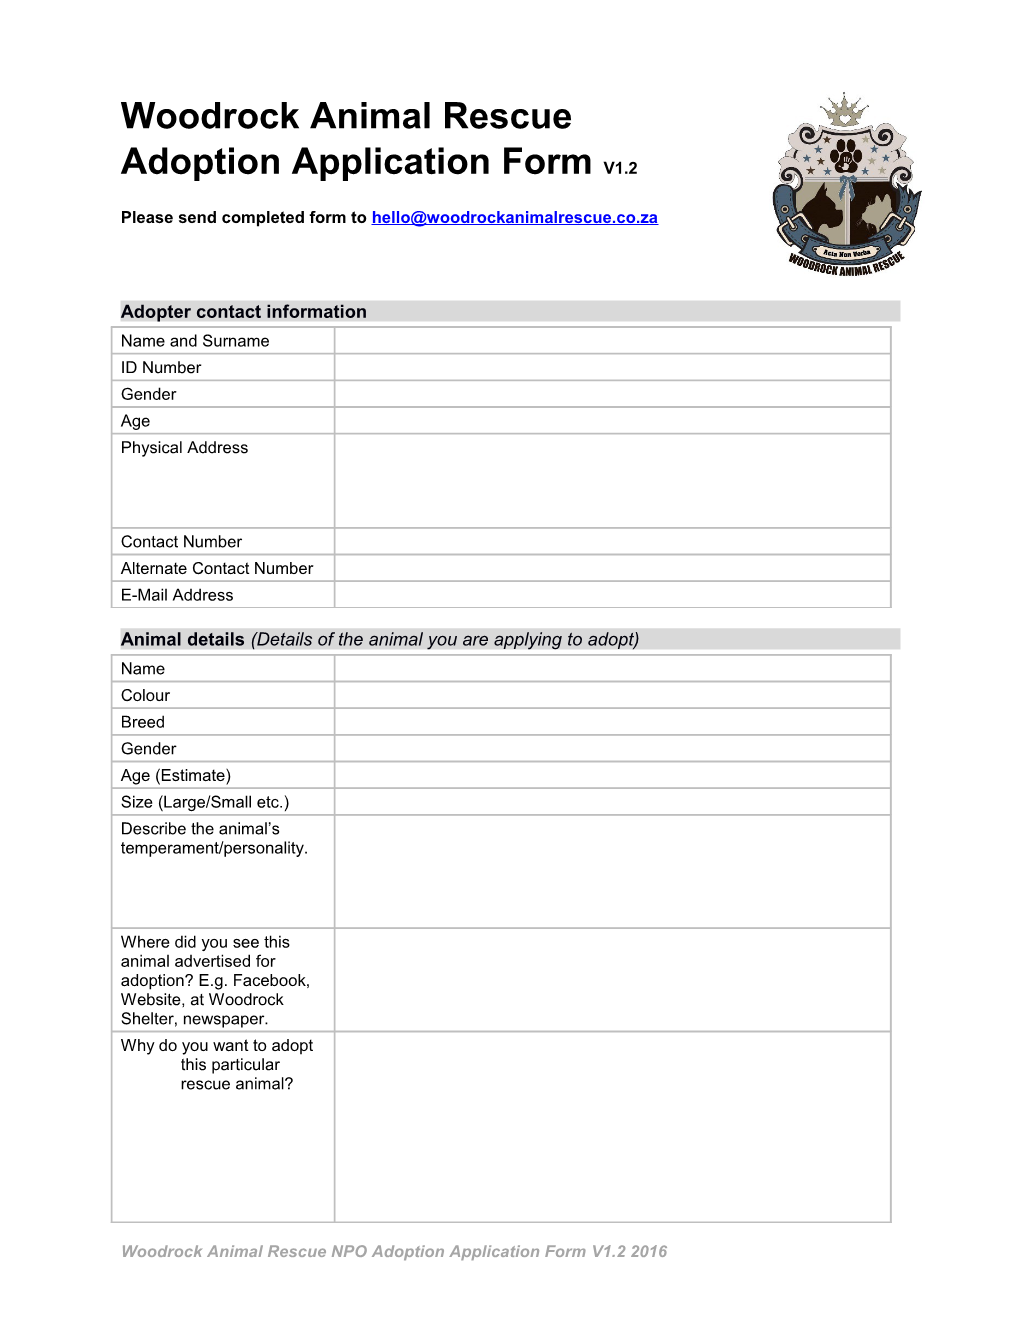 Animal Details (Details of the Animal You Are Applying to Adopt)